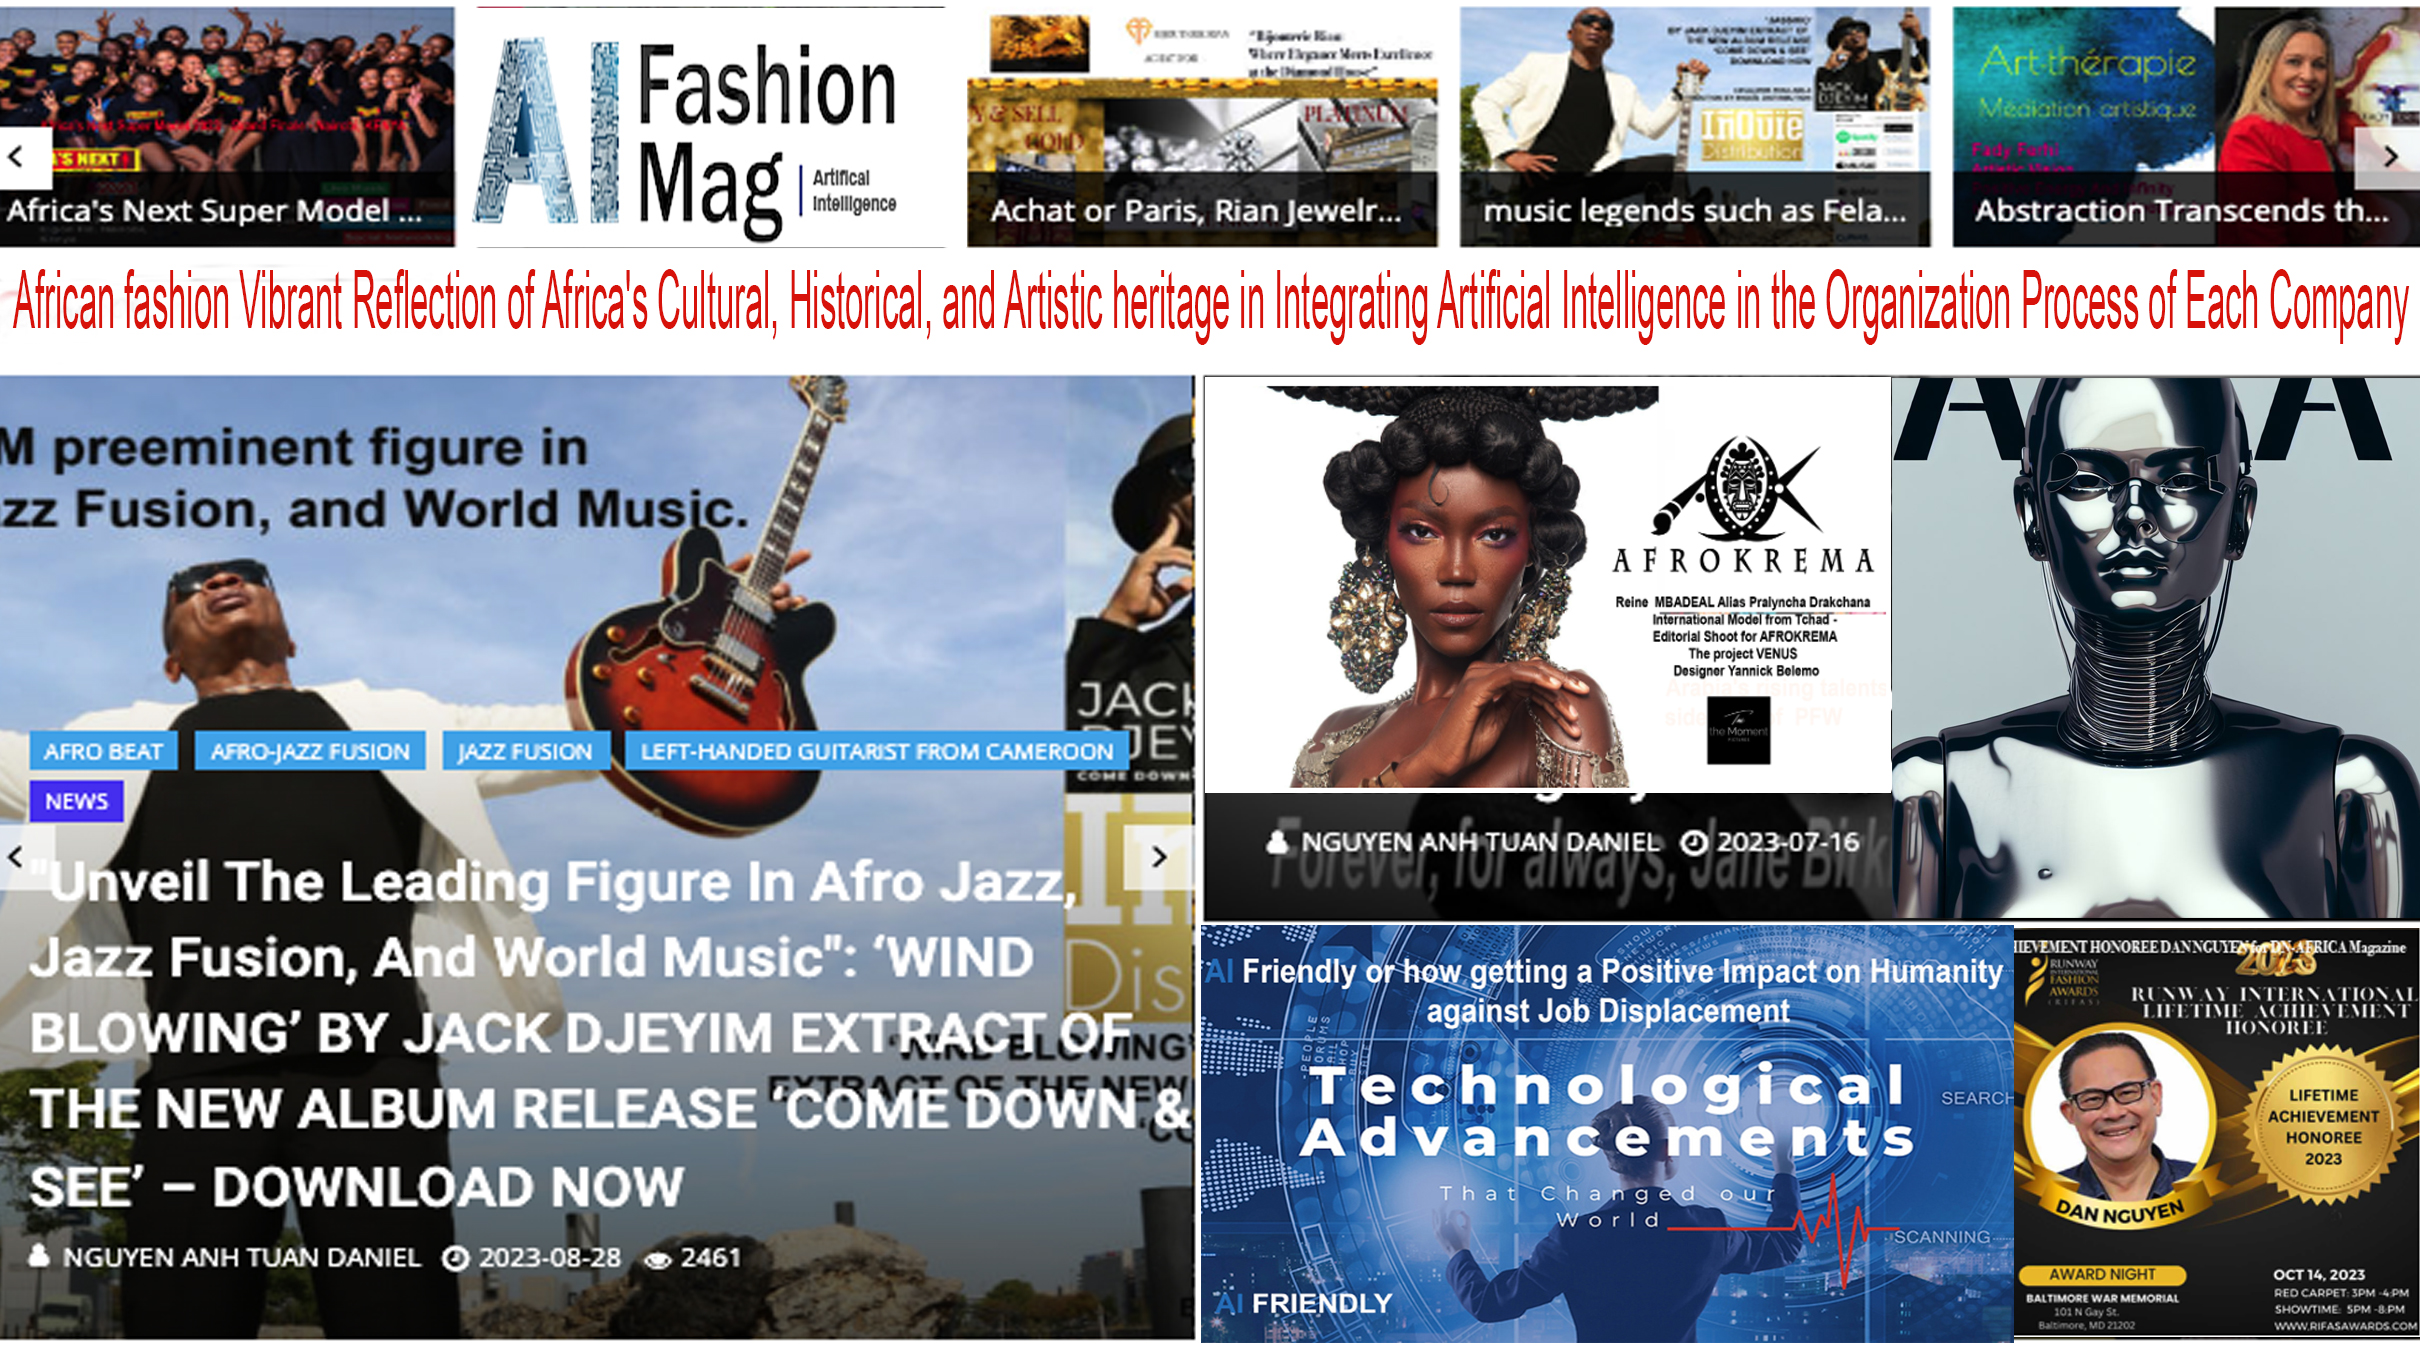 AFRICA-VOGUE-COVER-African-fashion-Vibrant-Reflection-of-Africa's-Cultural-Integrating-Artificial-Intelligence-in-the-Organization-Process-DN-AFRICA-Media-Partner